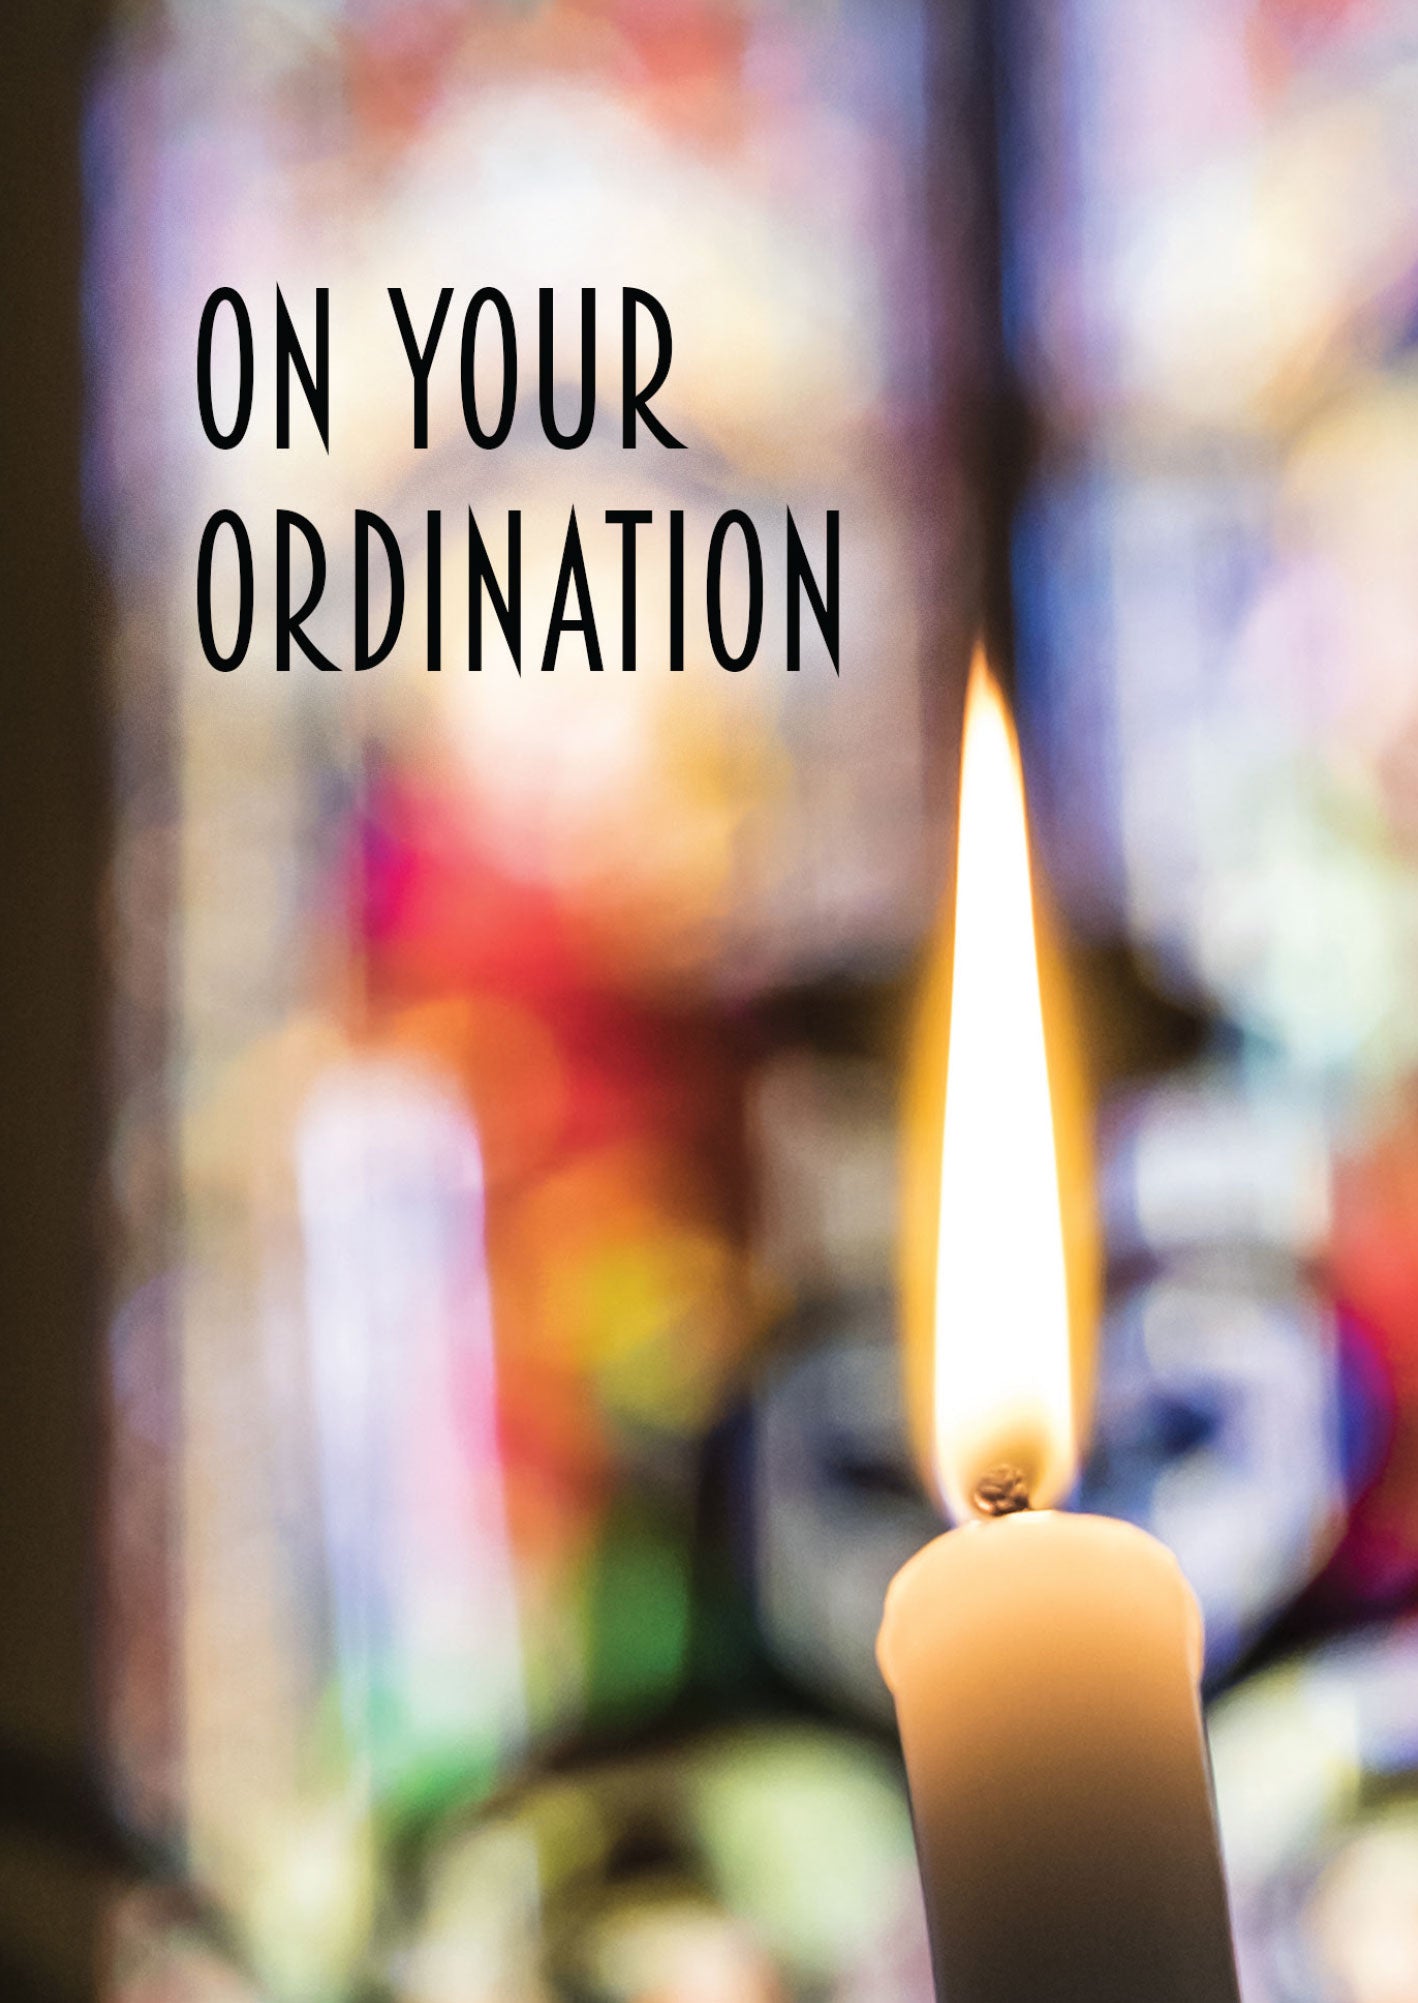 On Your Ordination - Candle 6pk